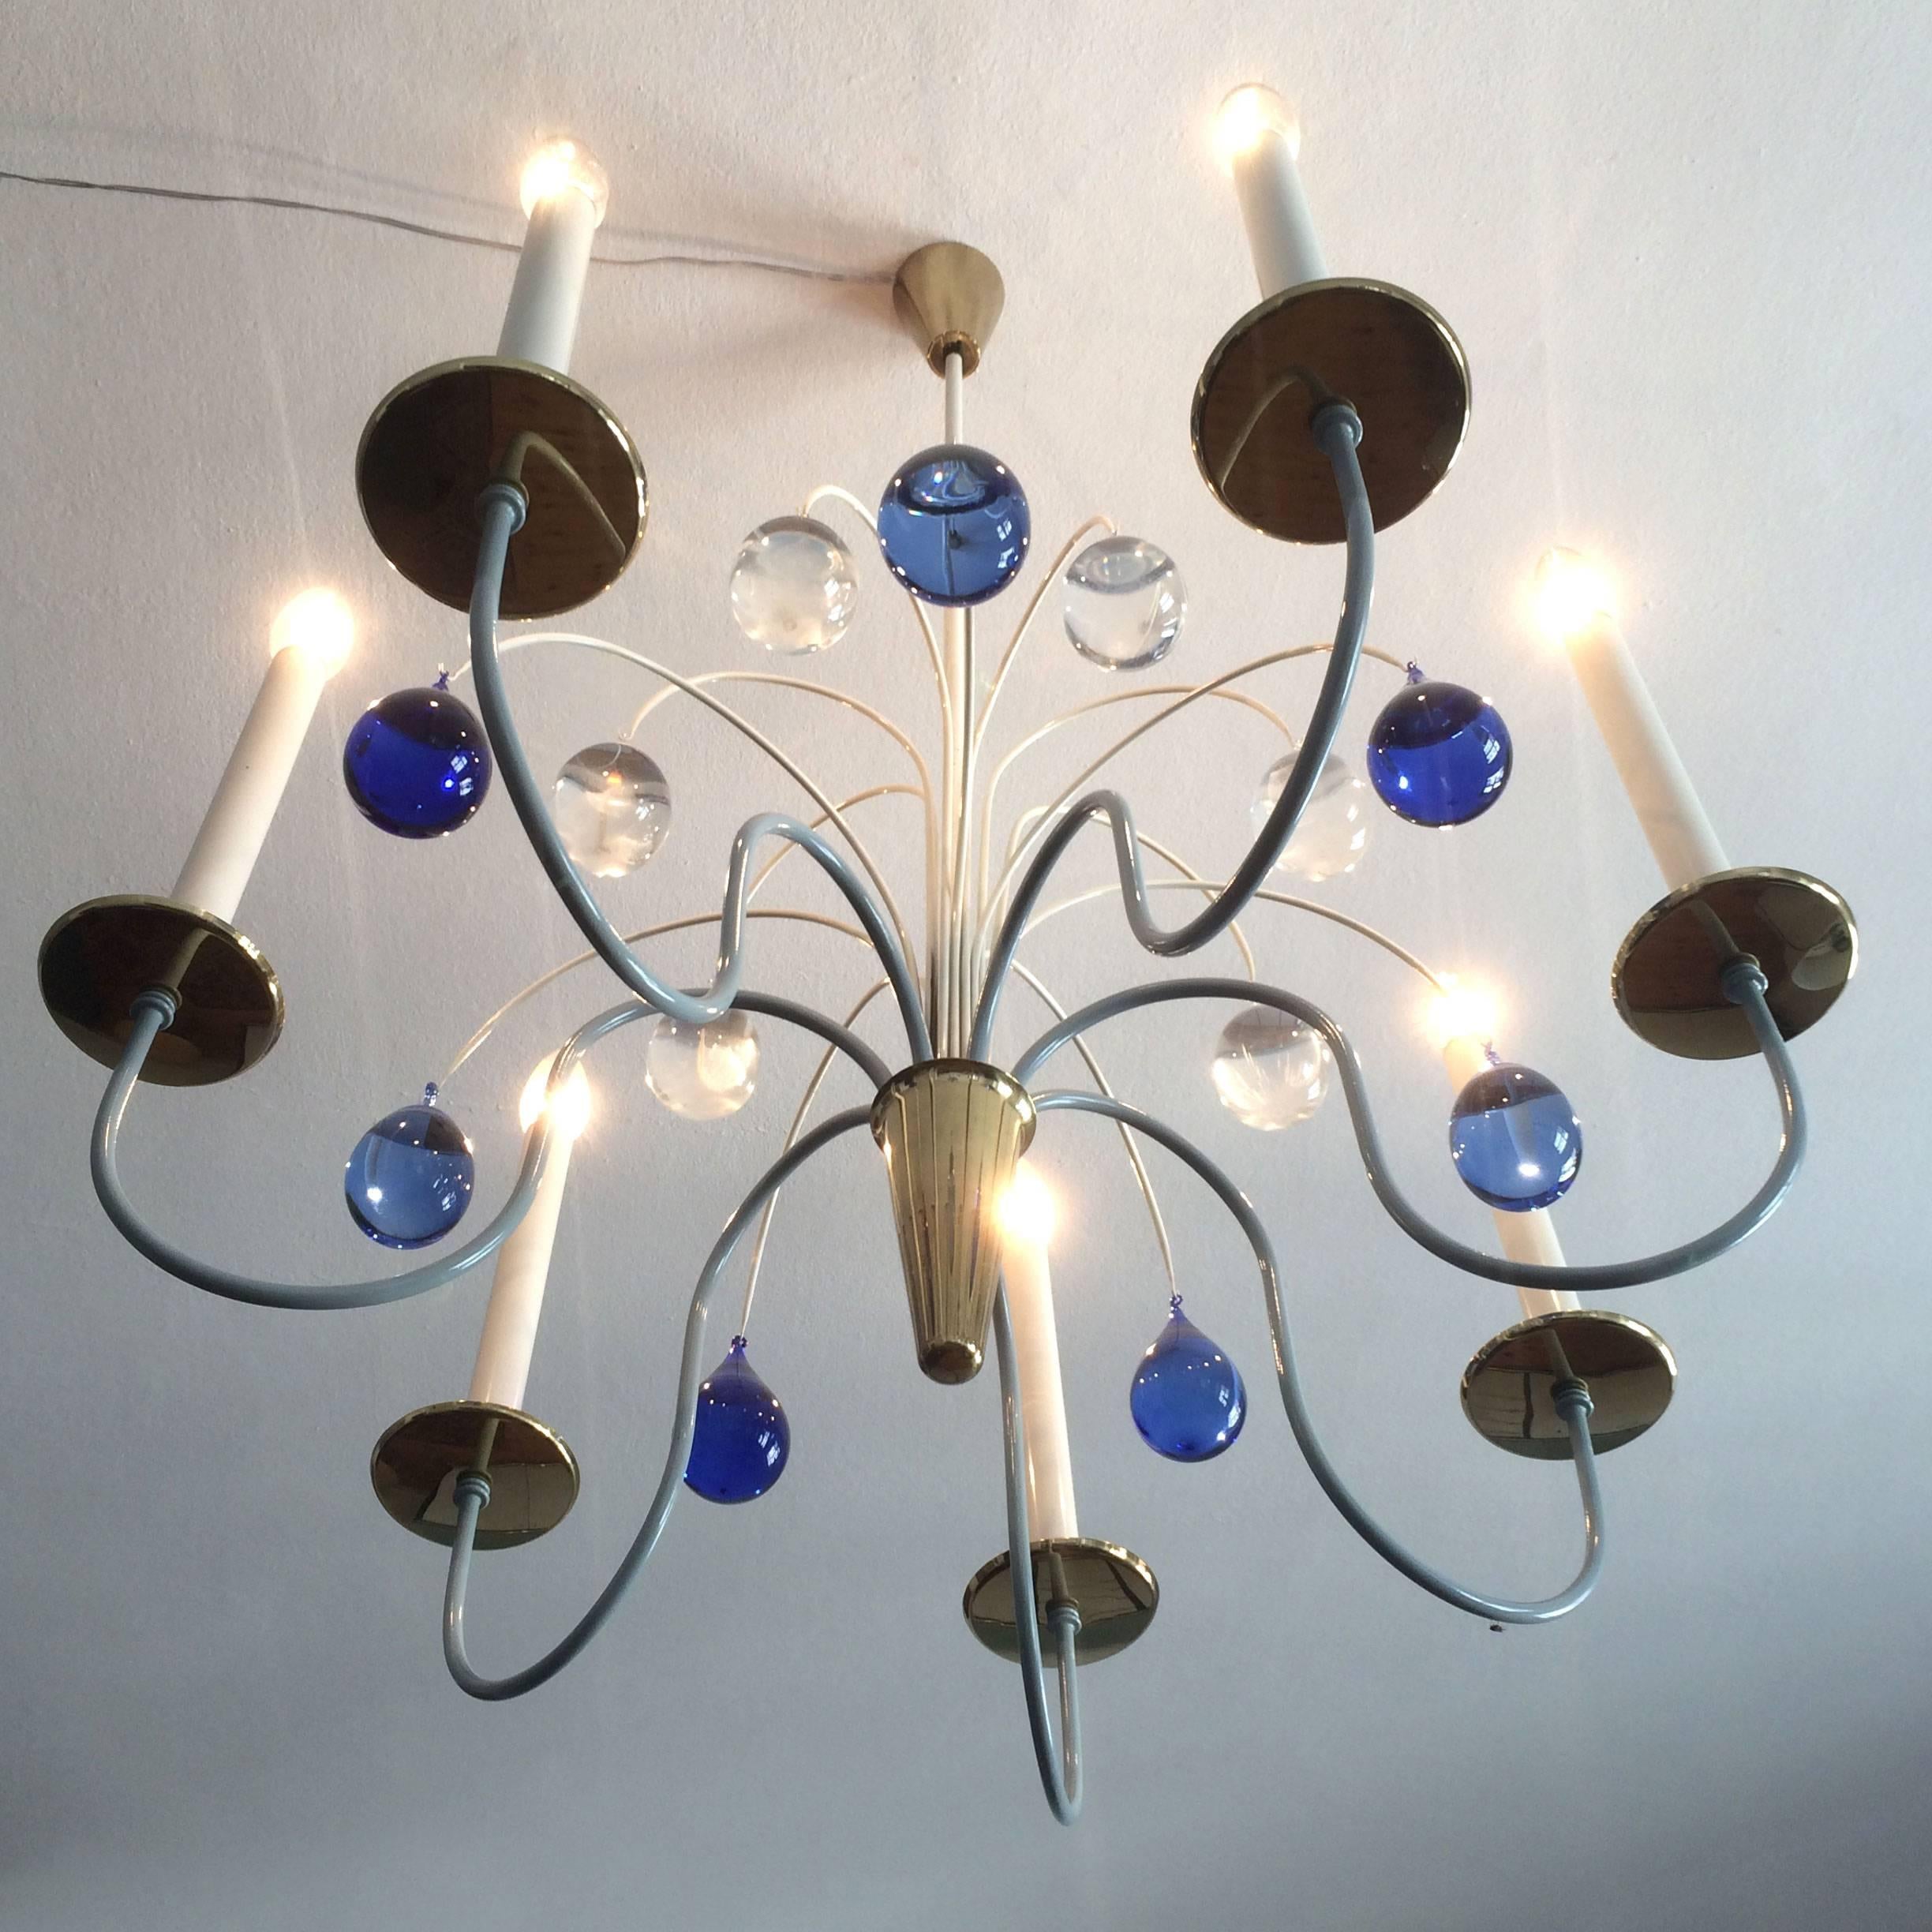 Mid-20th Century Seven-Armed Chandelier or Pendant Lamp by Vereinigte Werkstätten Germany 1950s For Sale